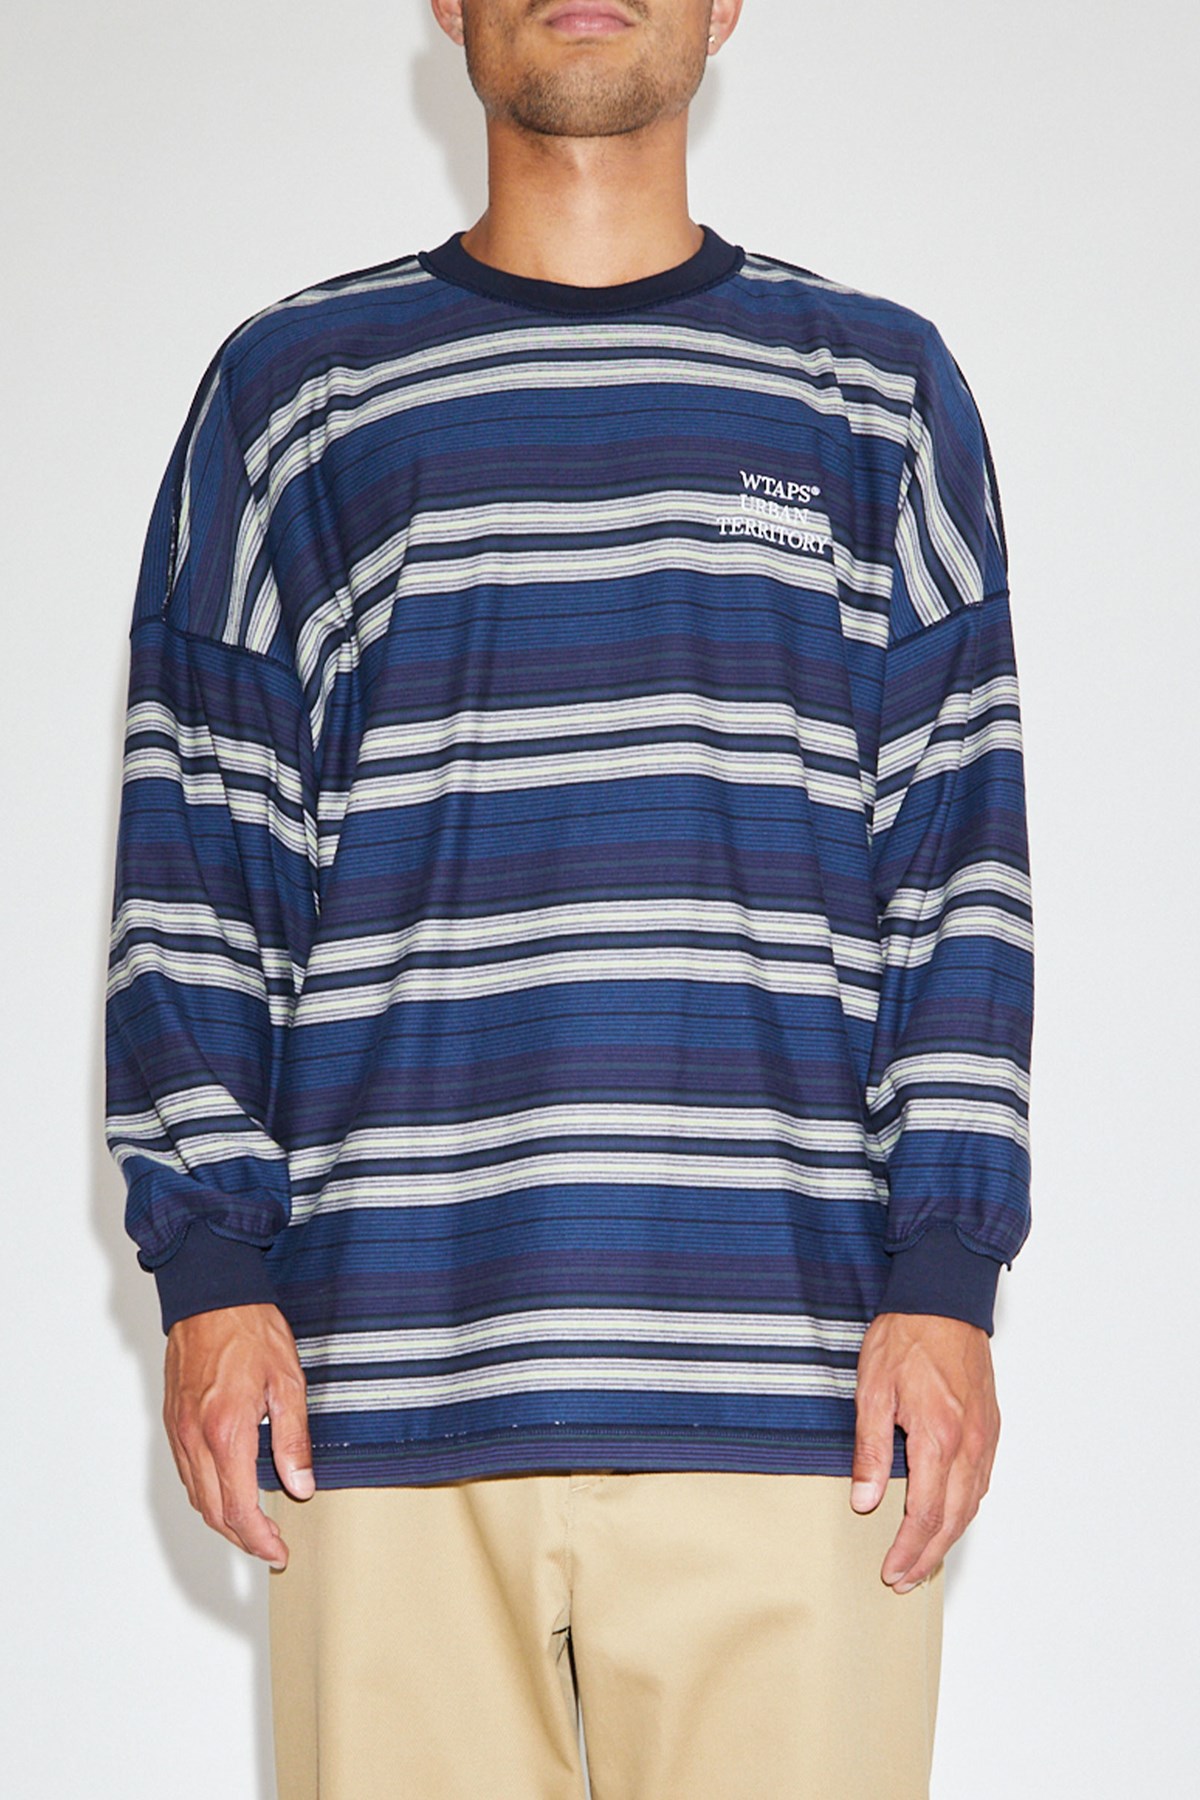 wtaps 22ss ALL 02 /SWEATER /COTTON L03 | ethicsinsports.ch